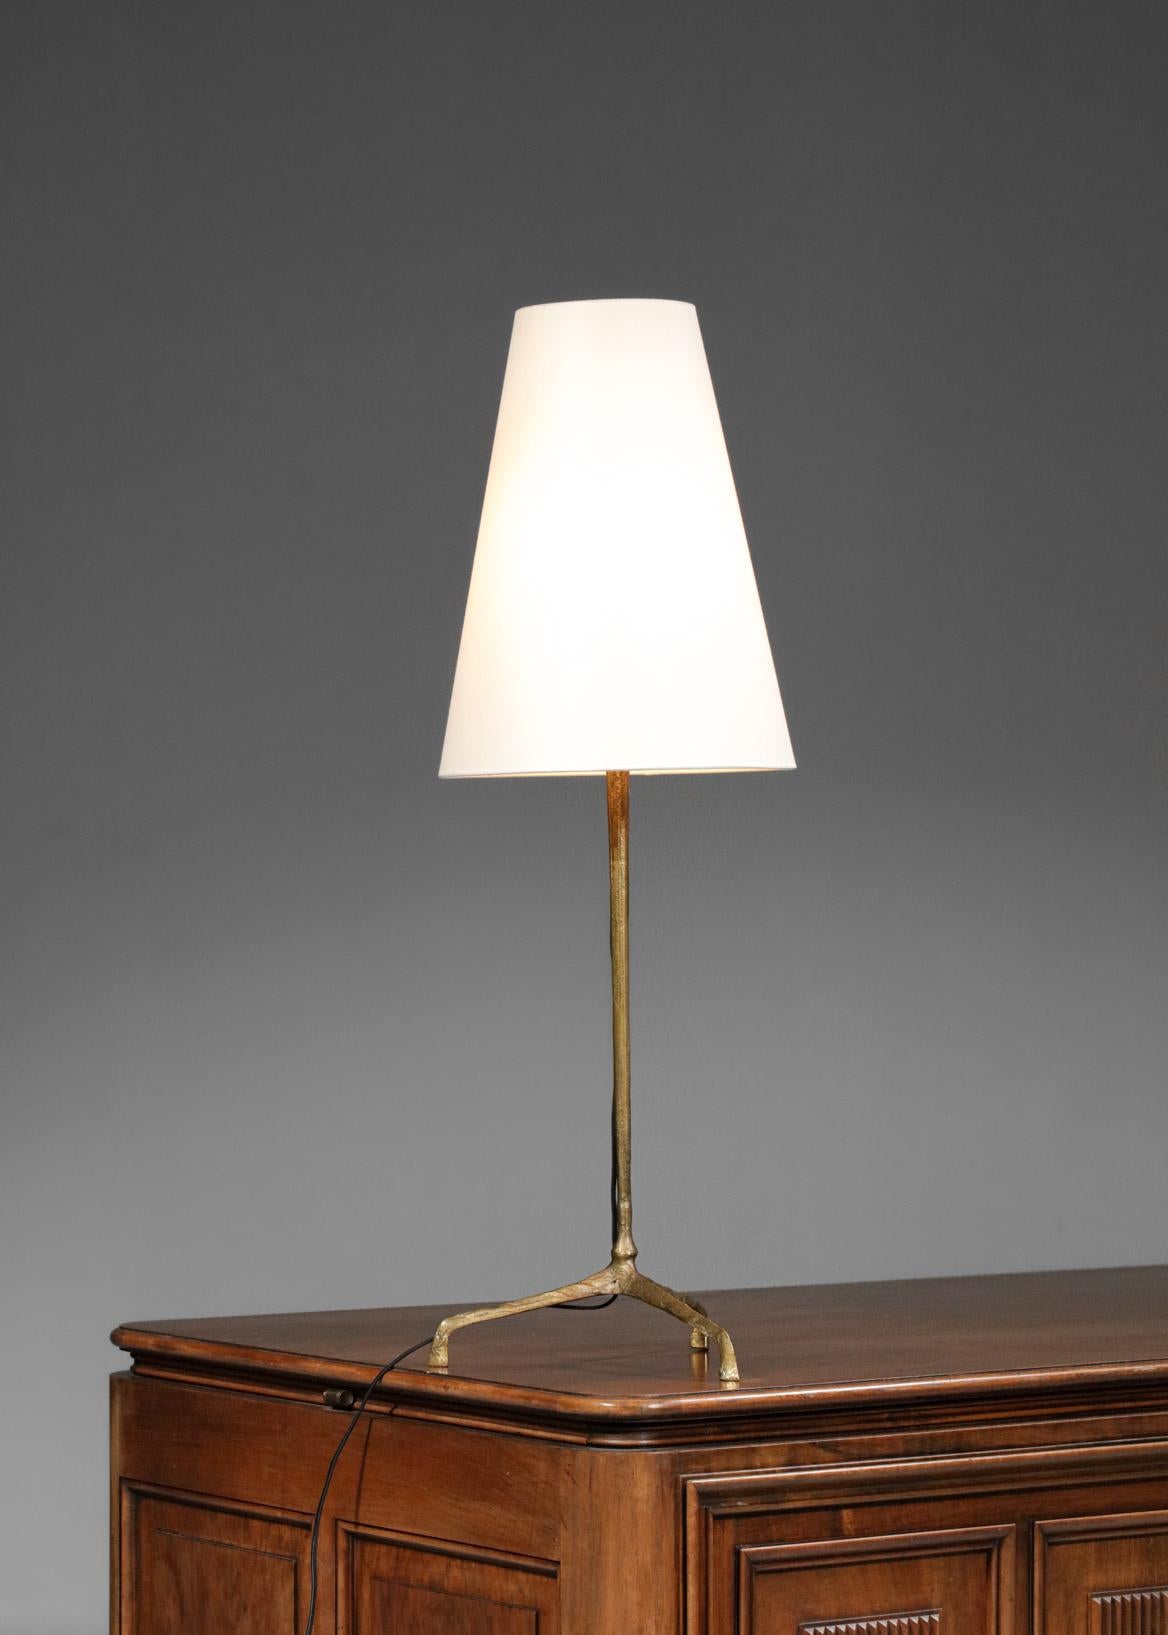 Rare table lamp designer and sculptor Felix Agostini in gilded bronze from the 50s. Solid gilded bronze tripod base, custom made lampshade. Excellent vintage condition, with a superb patina of the bronze. Recommended LED bulb type B22, electrical